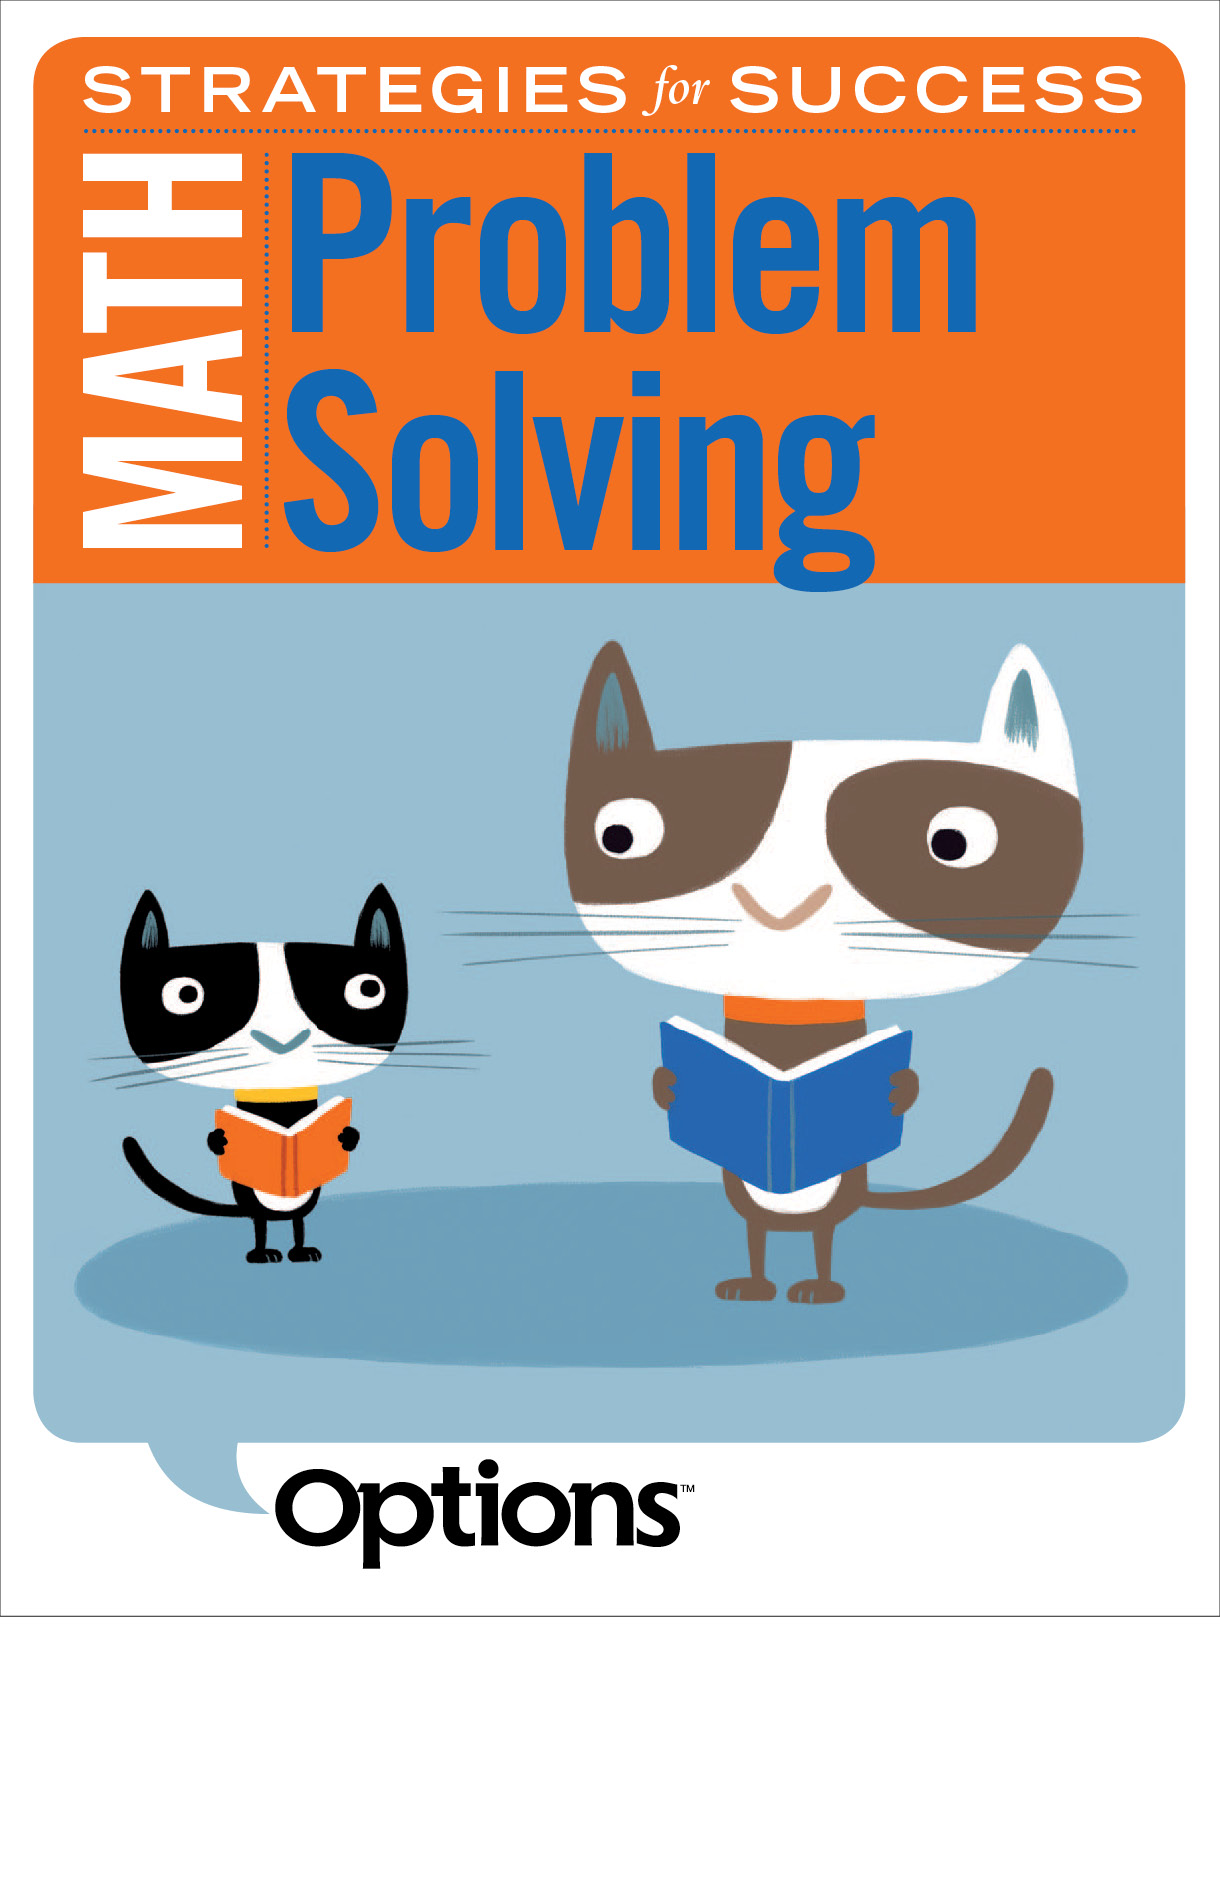 Book cover of Math Strategies for Success, Problem Solving. It has two cats reading books.